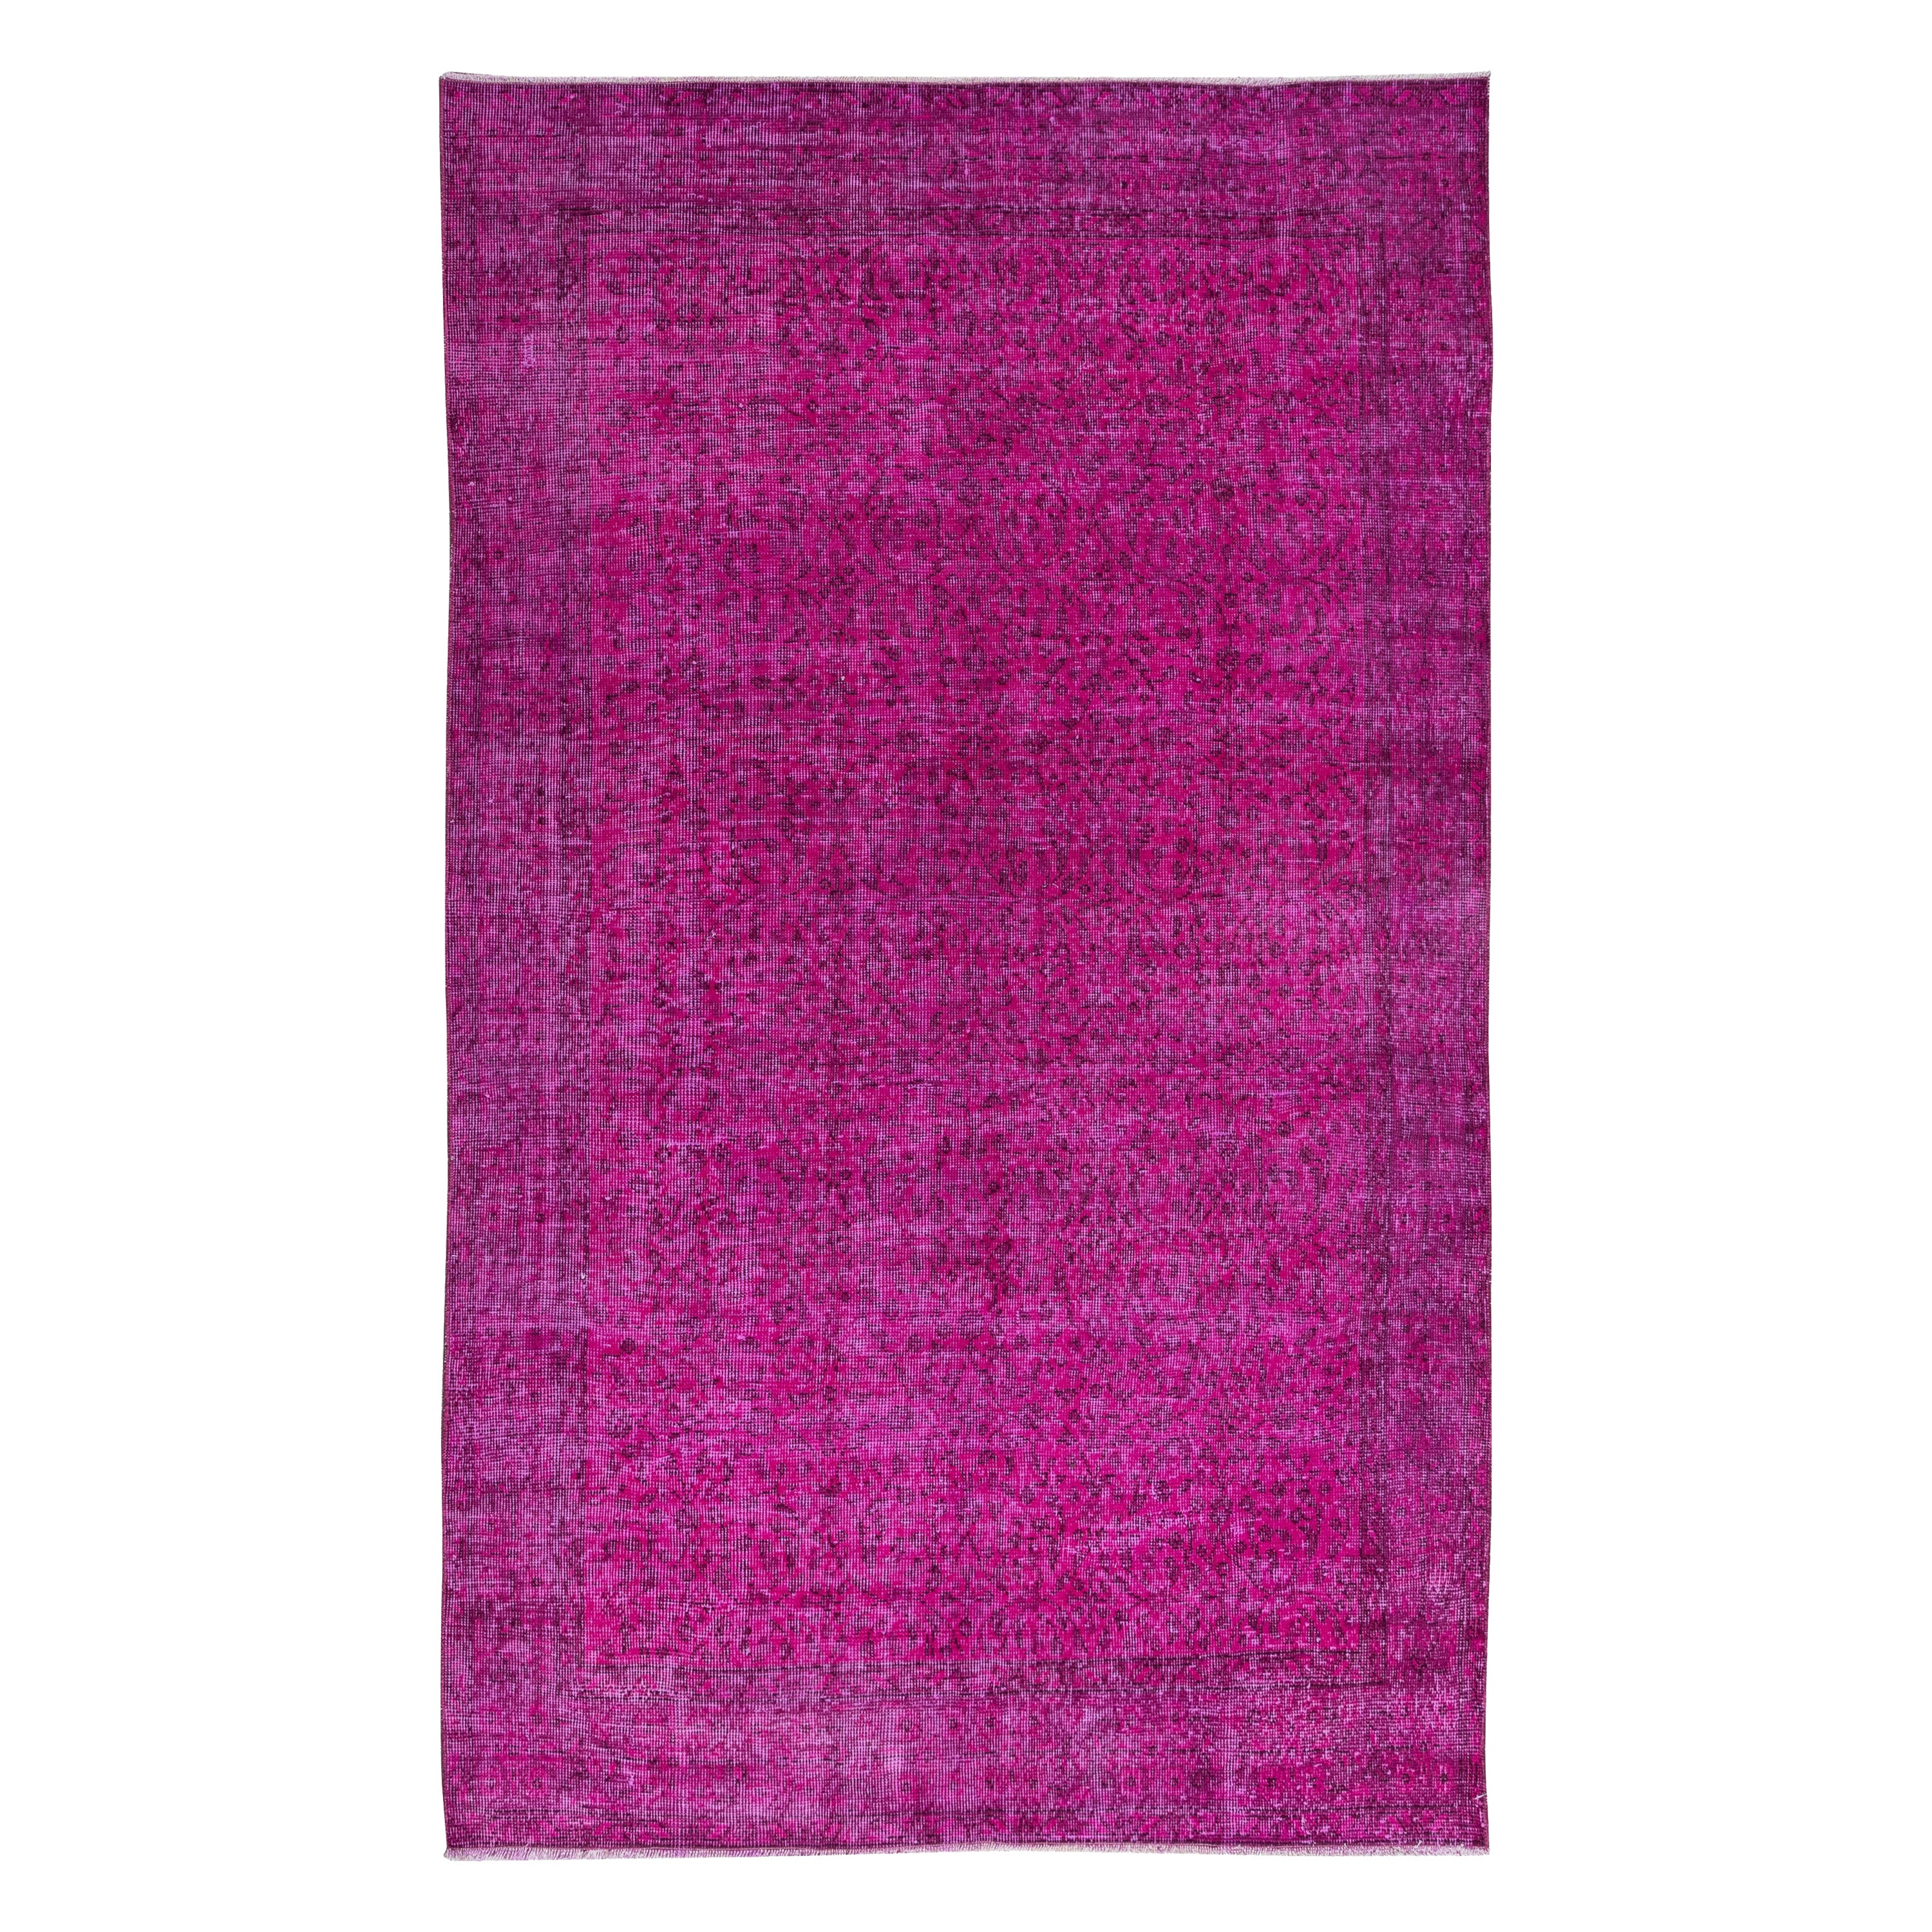 5.2x8.4 Ft Pink Rug From Turkey, Great 4 Modern Interior, Handmade Floral Carpet For Sale